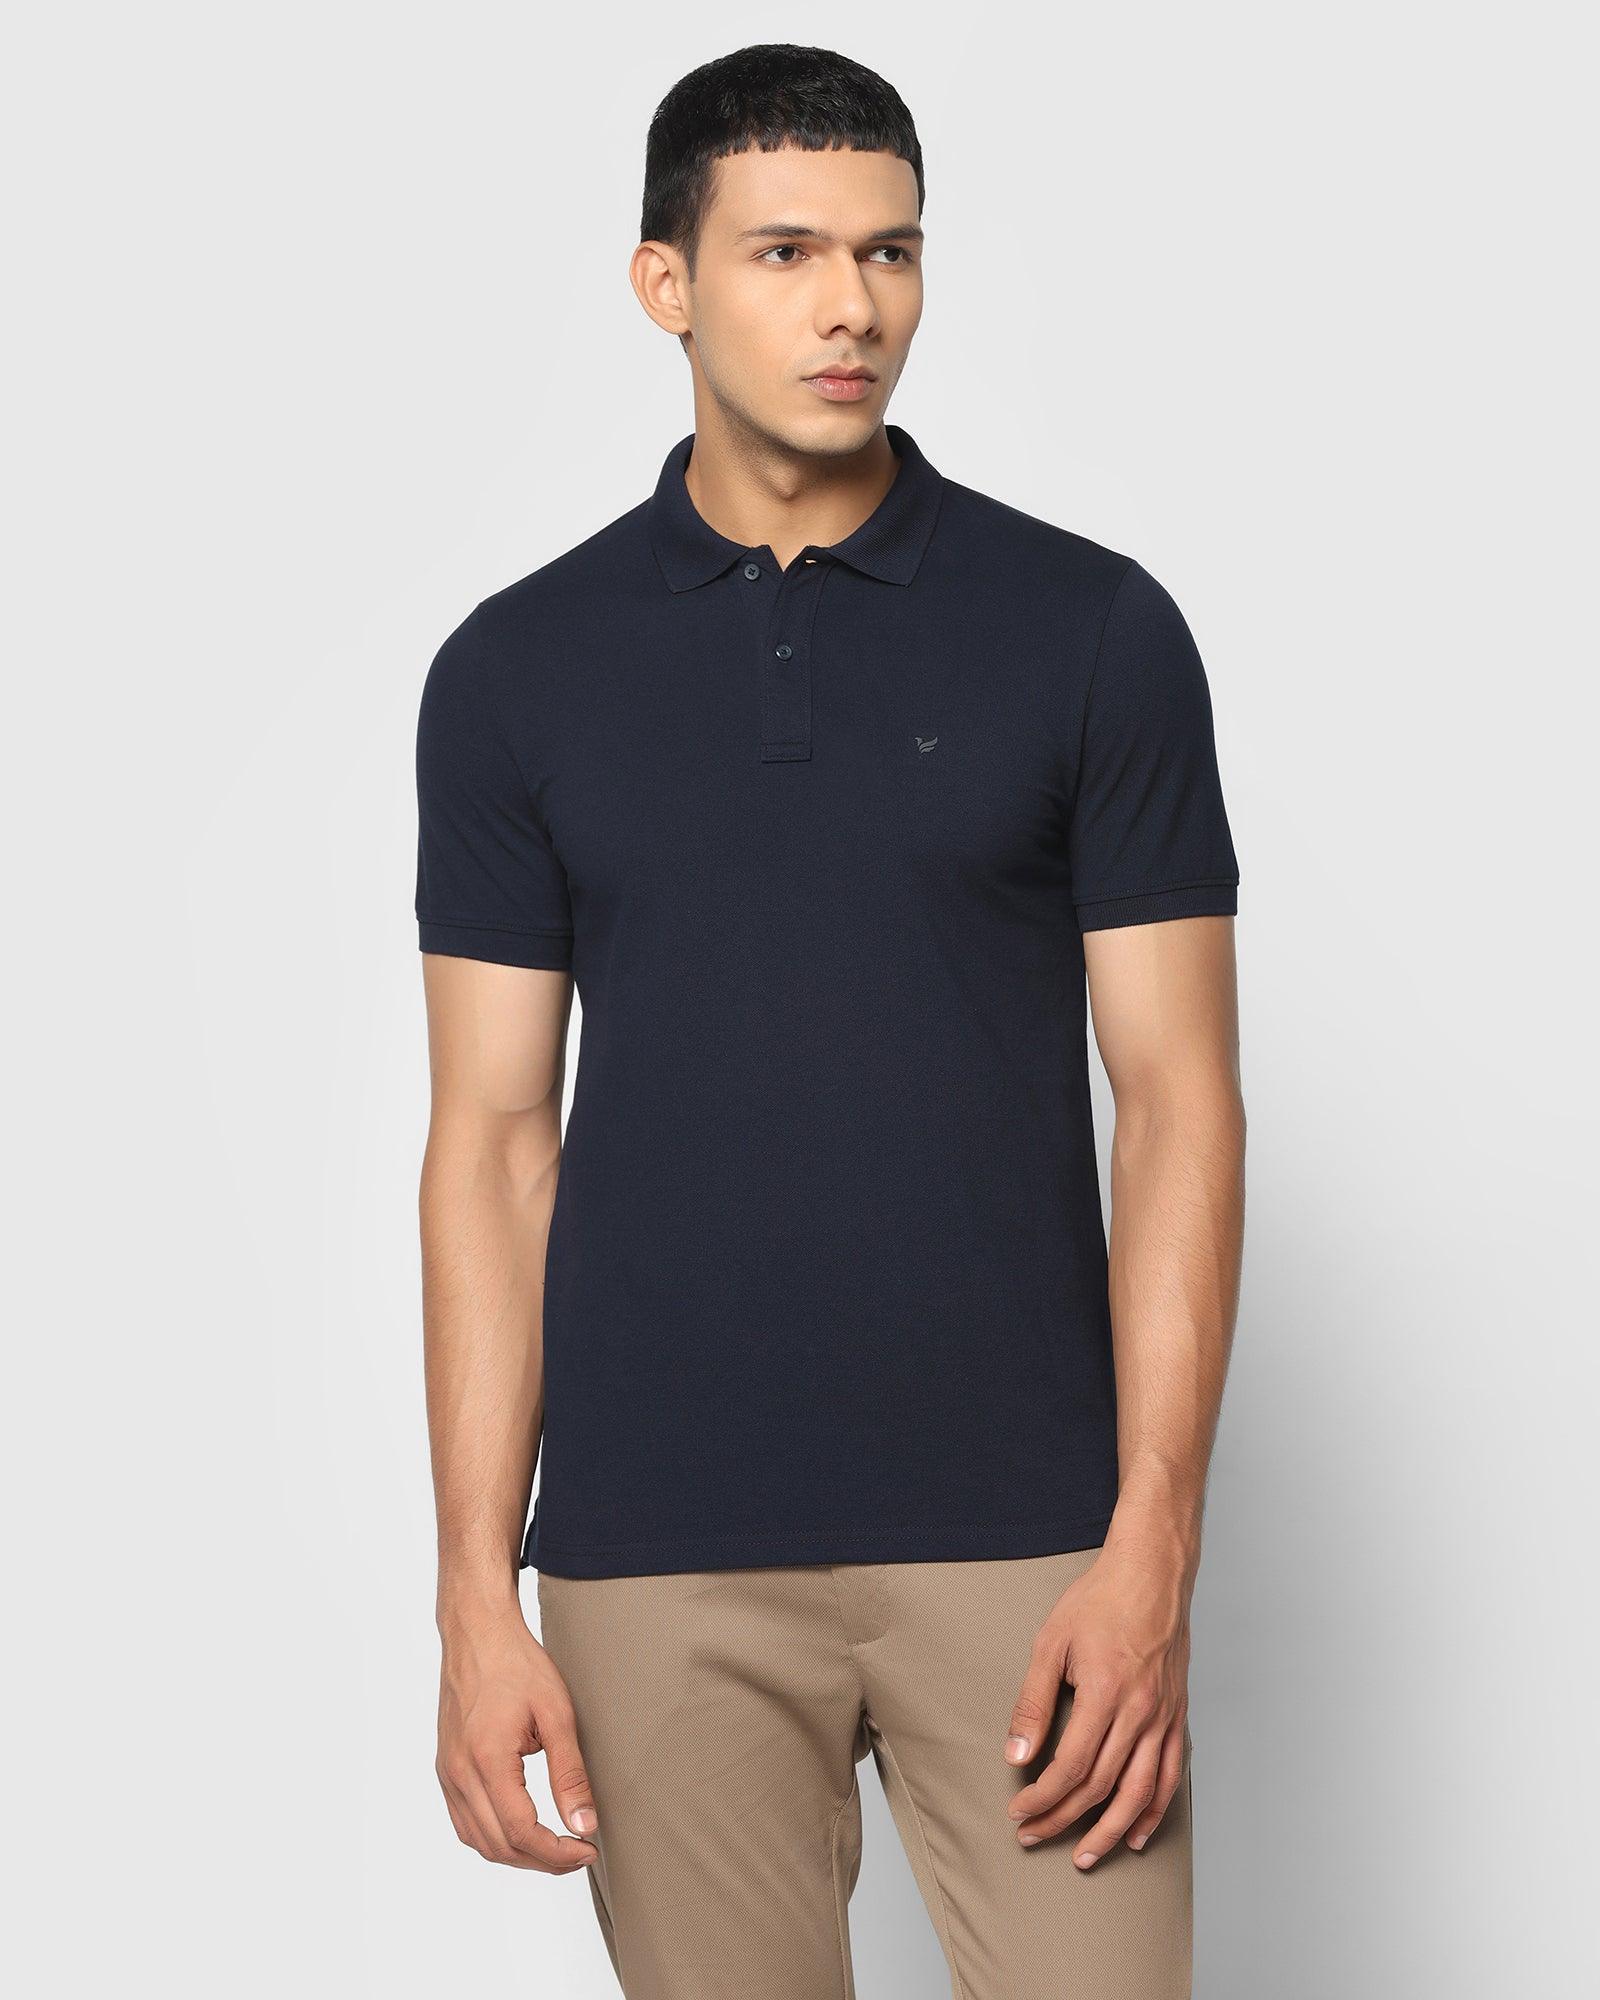 Polo Navy Solid T Shirt - Bright